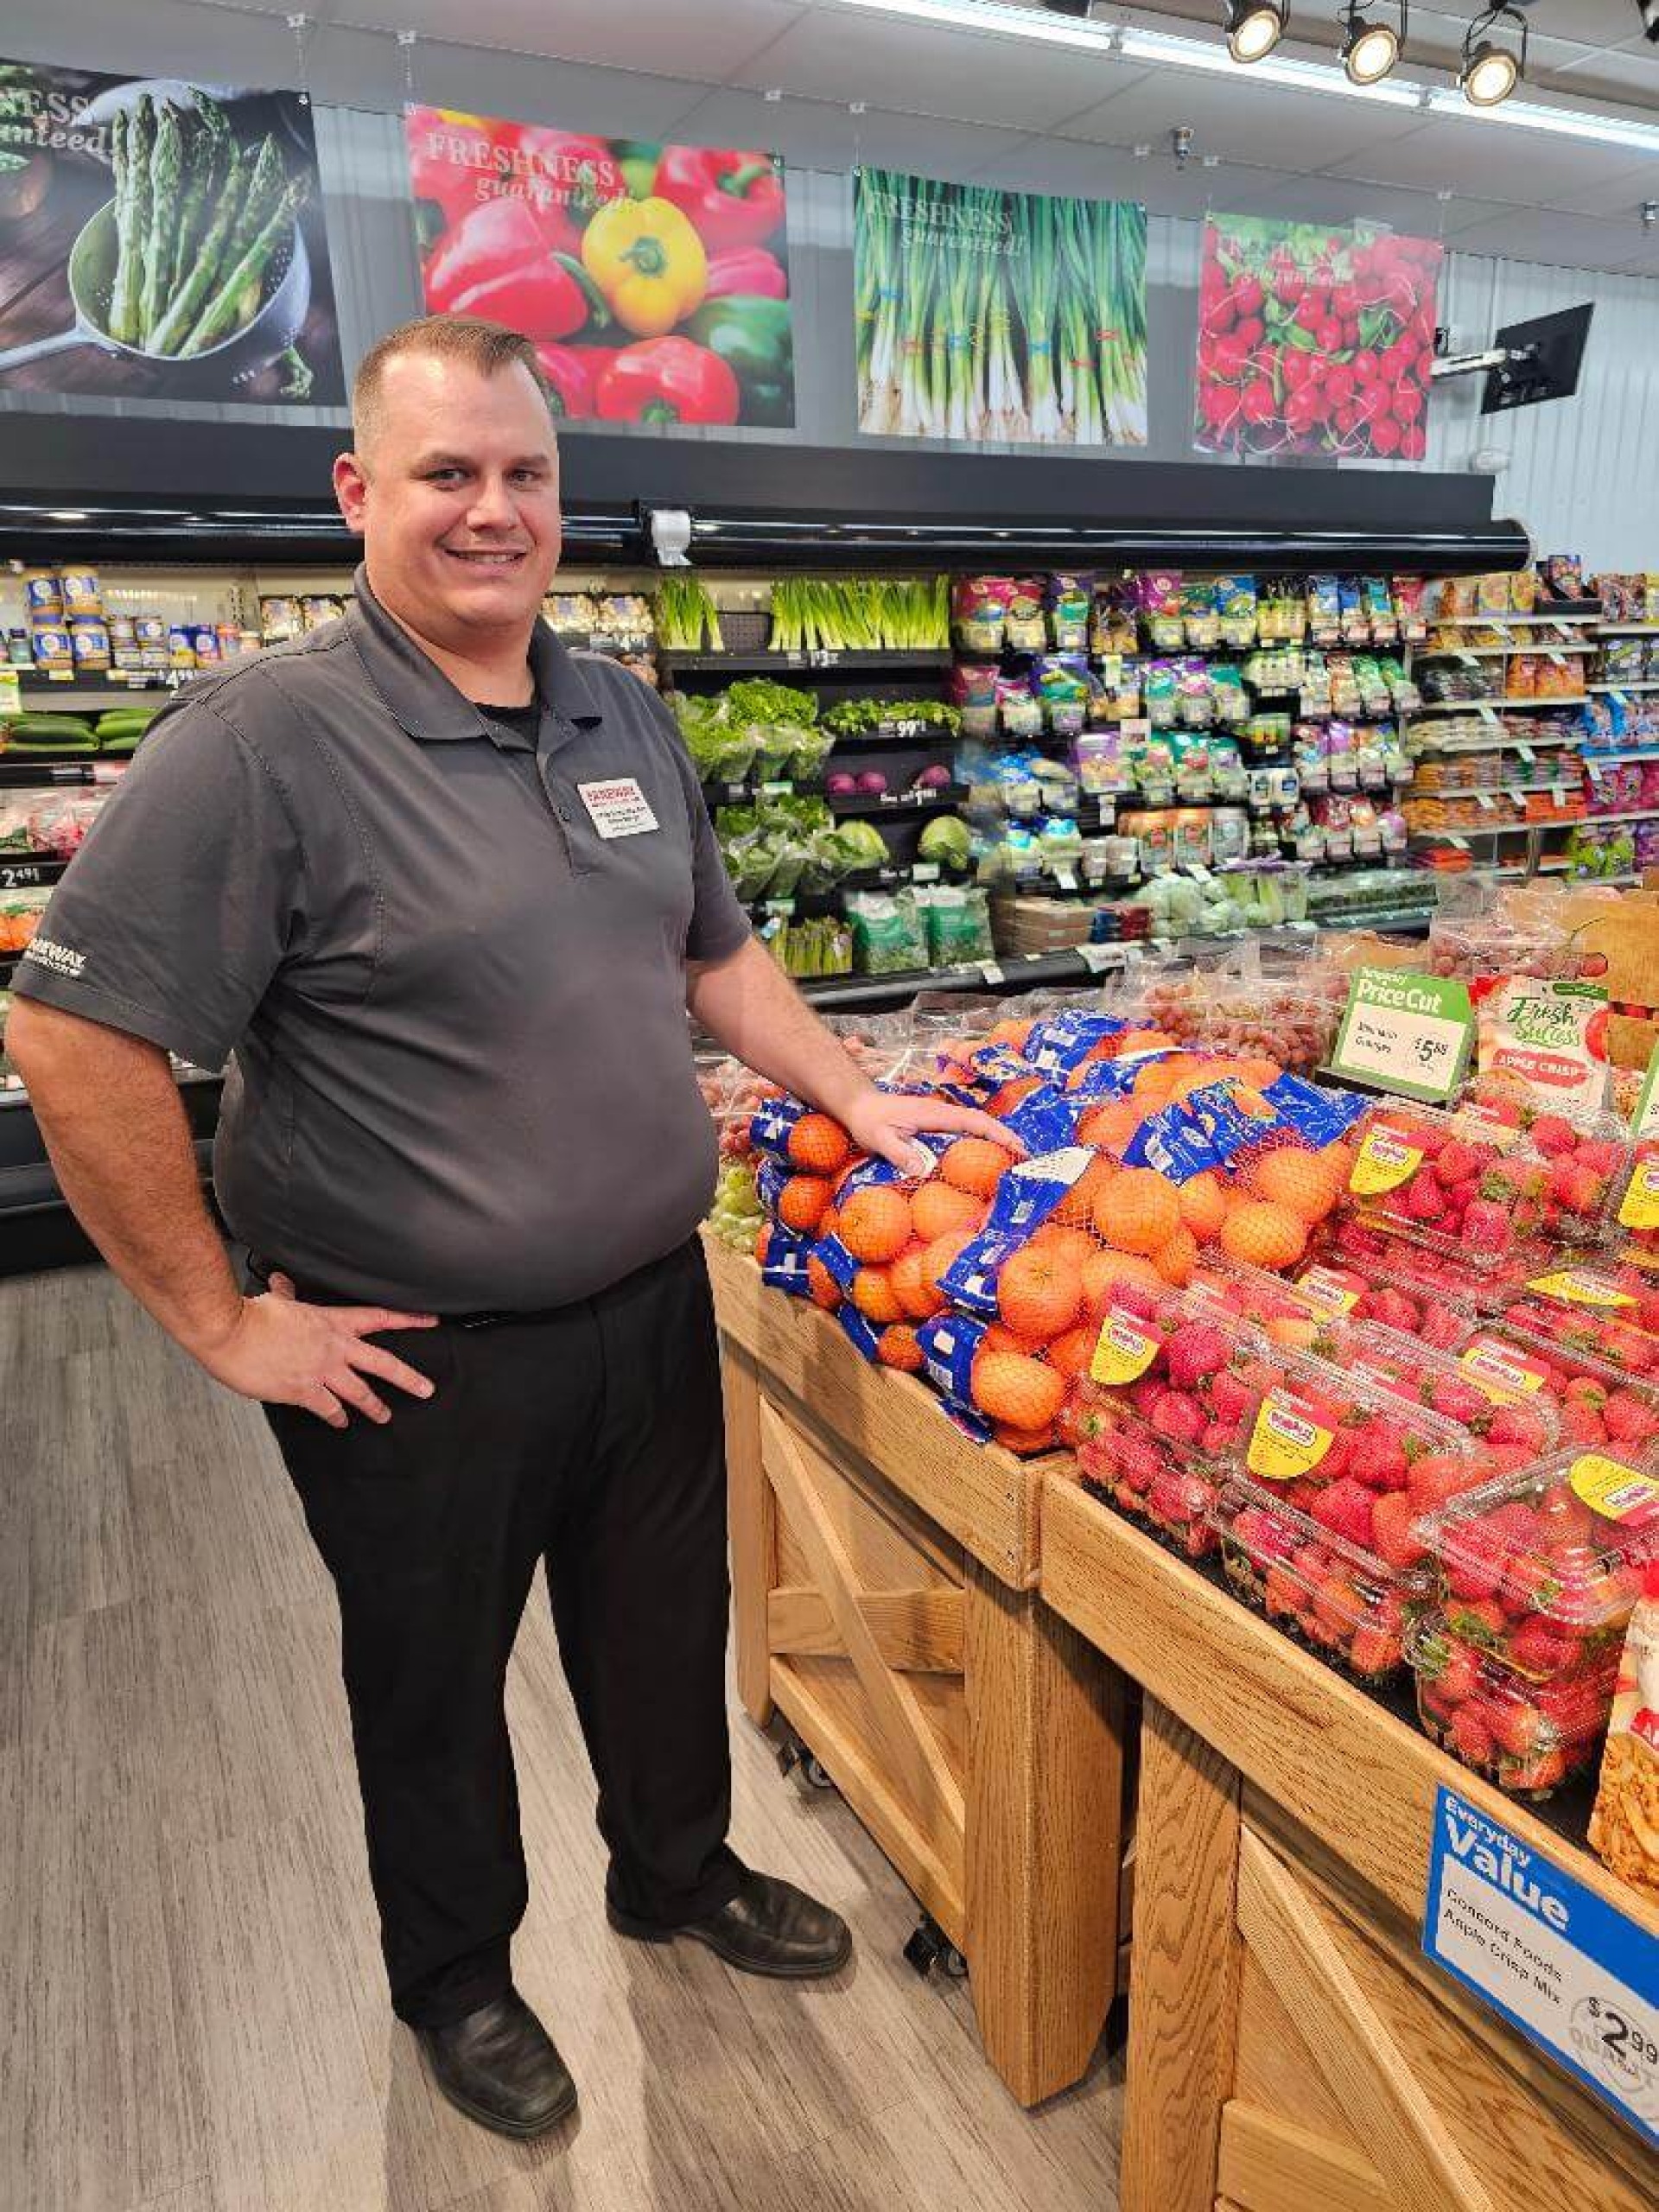 Farewell Rockwell City's Store Manager, Dave Kistenmacher, stands in front of the store's produce.